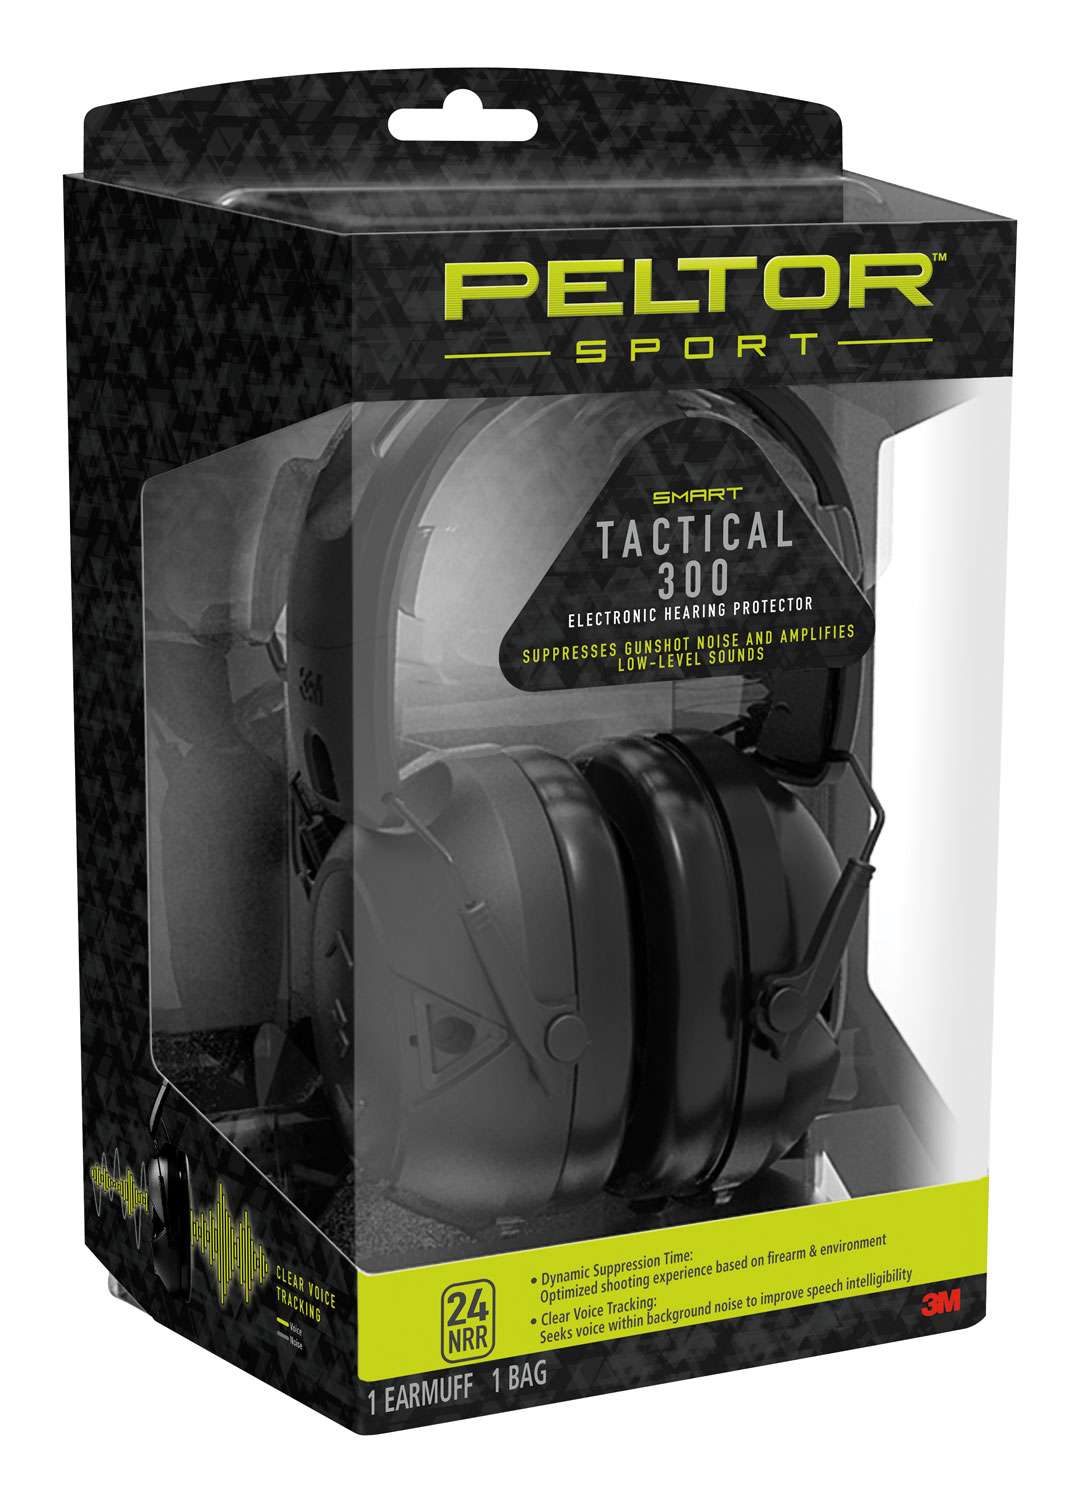 3M Peltor Sport Tactical 300 Electronic Hearing Protection Ear Muffs 24 dB Black 